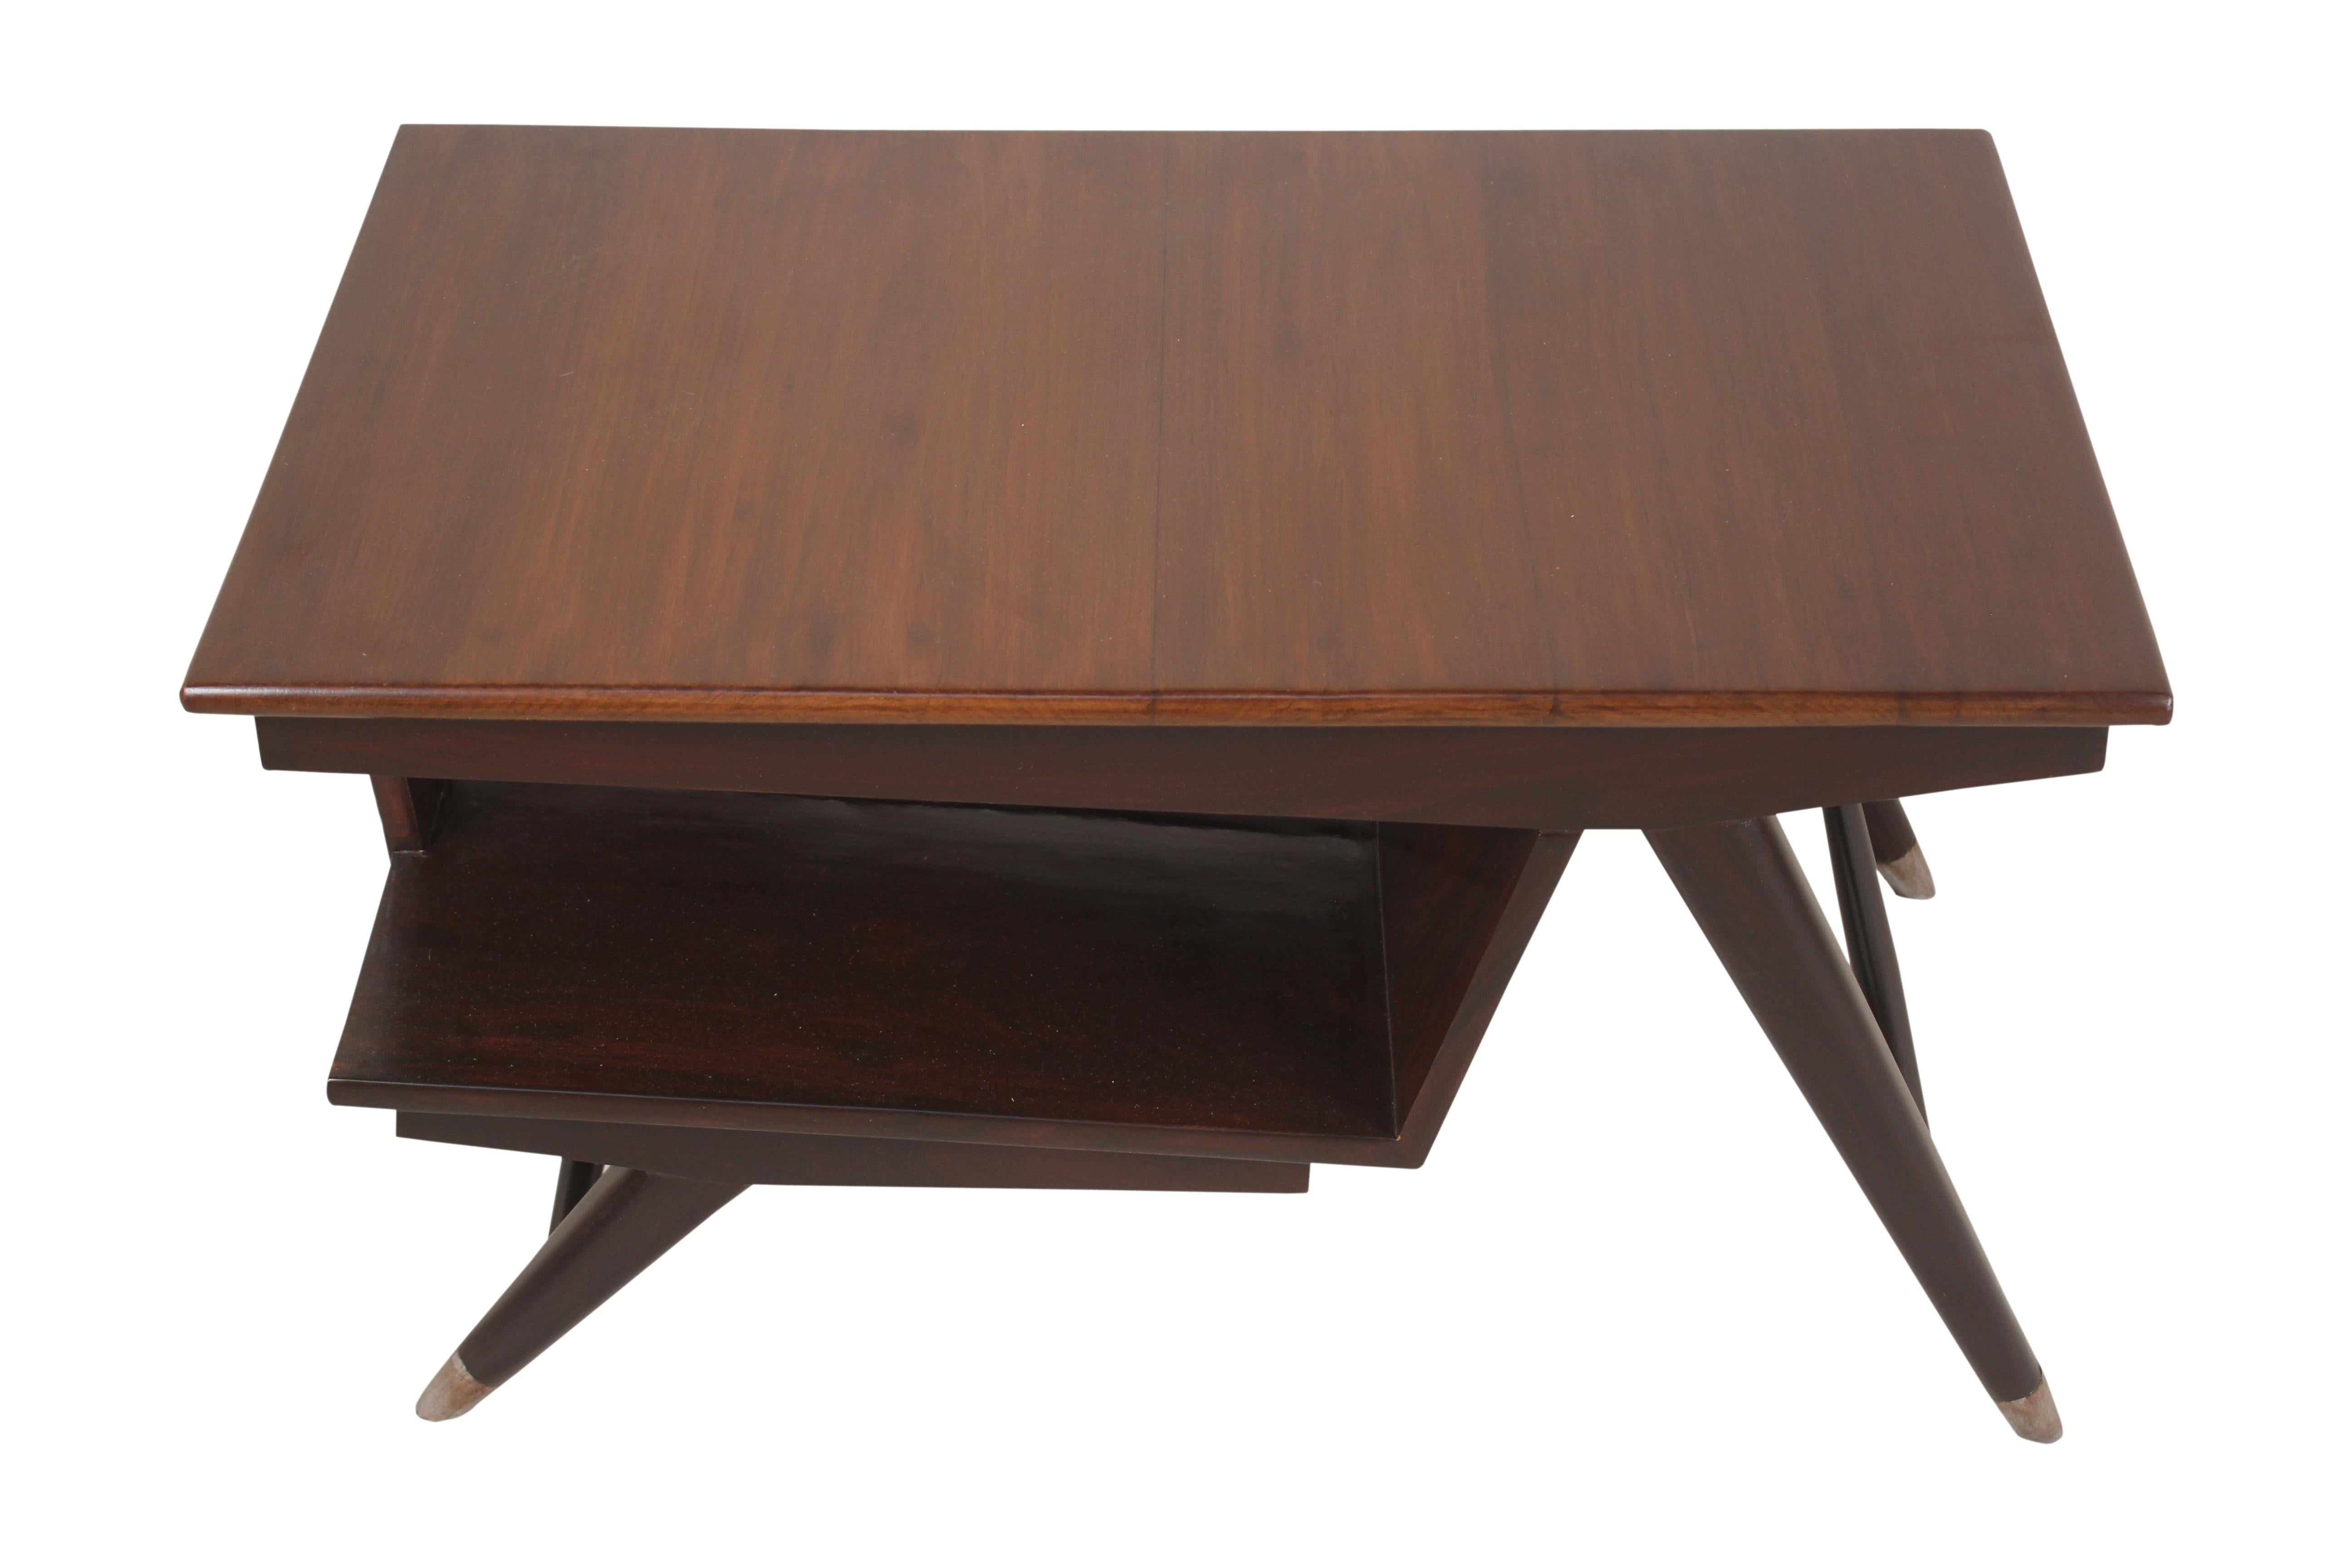 Mid-Century Modern teak coffee or cocktail table with an angled lower shelf for magazines or books. Brass feet on splayed legs and a carved harlequin design side support.